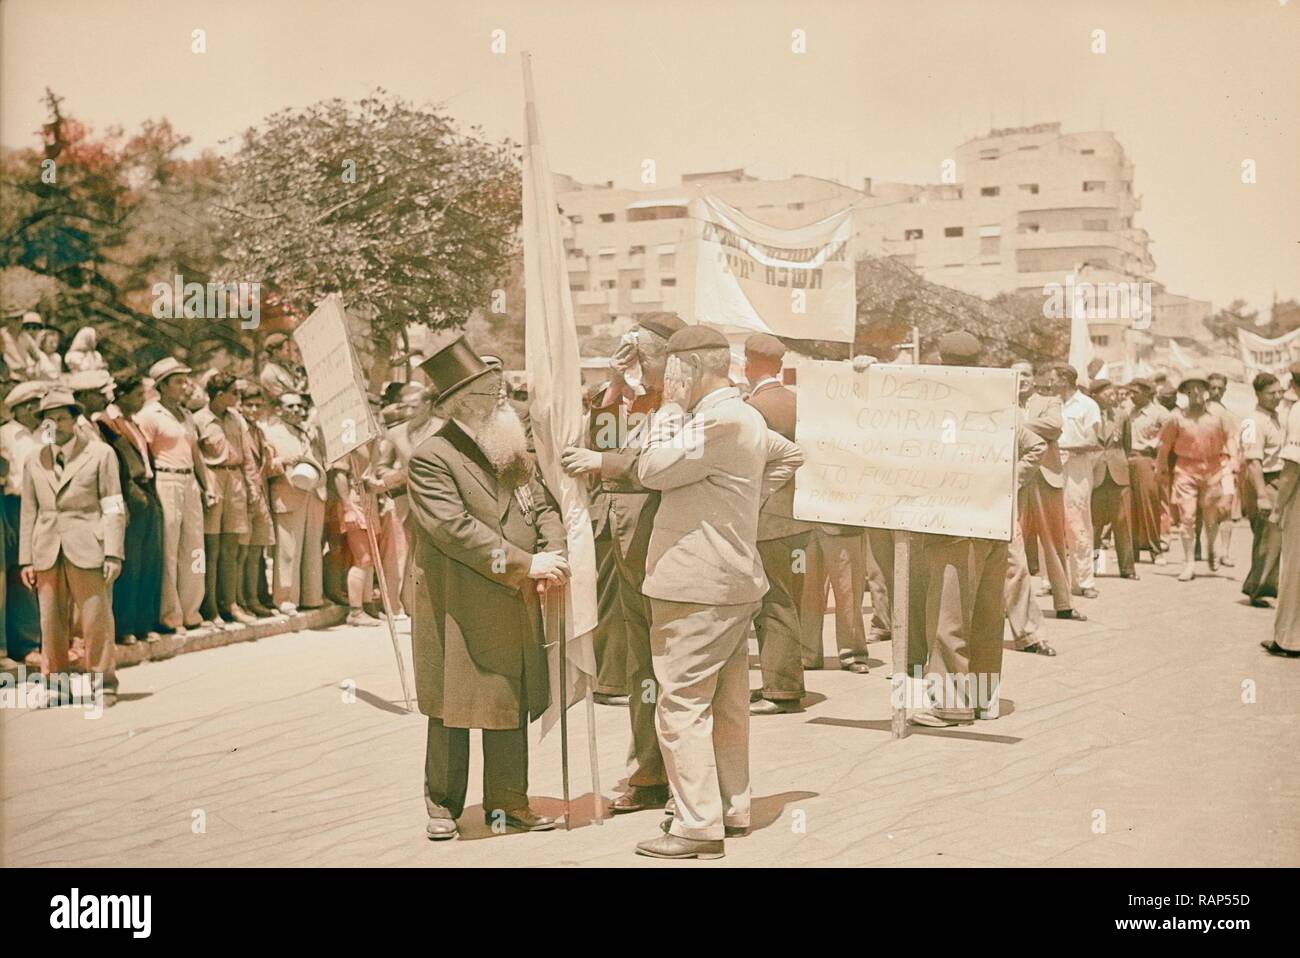 Jewish protest demonstrations against Palestine White Paper, May 18, 1939. Great War legionaries with their veteran reimagined Stock Photo